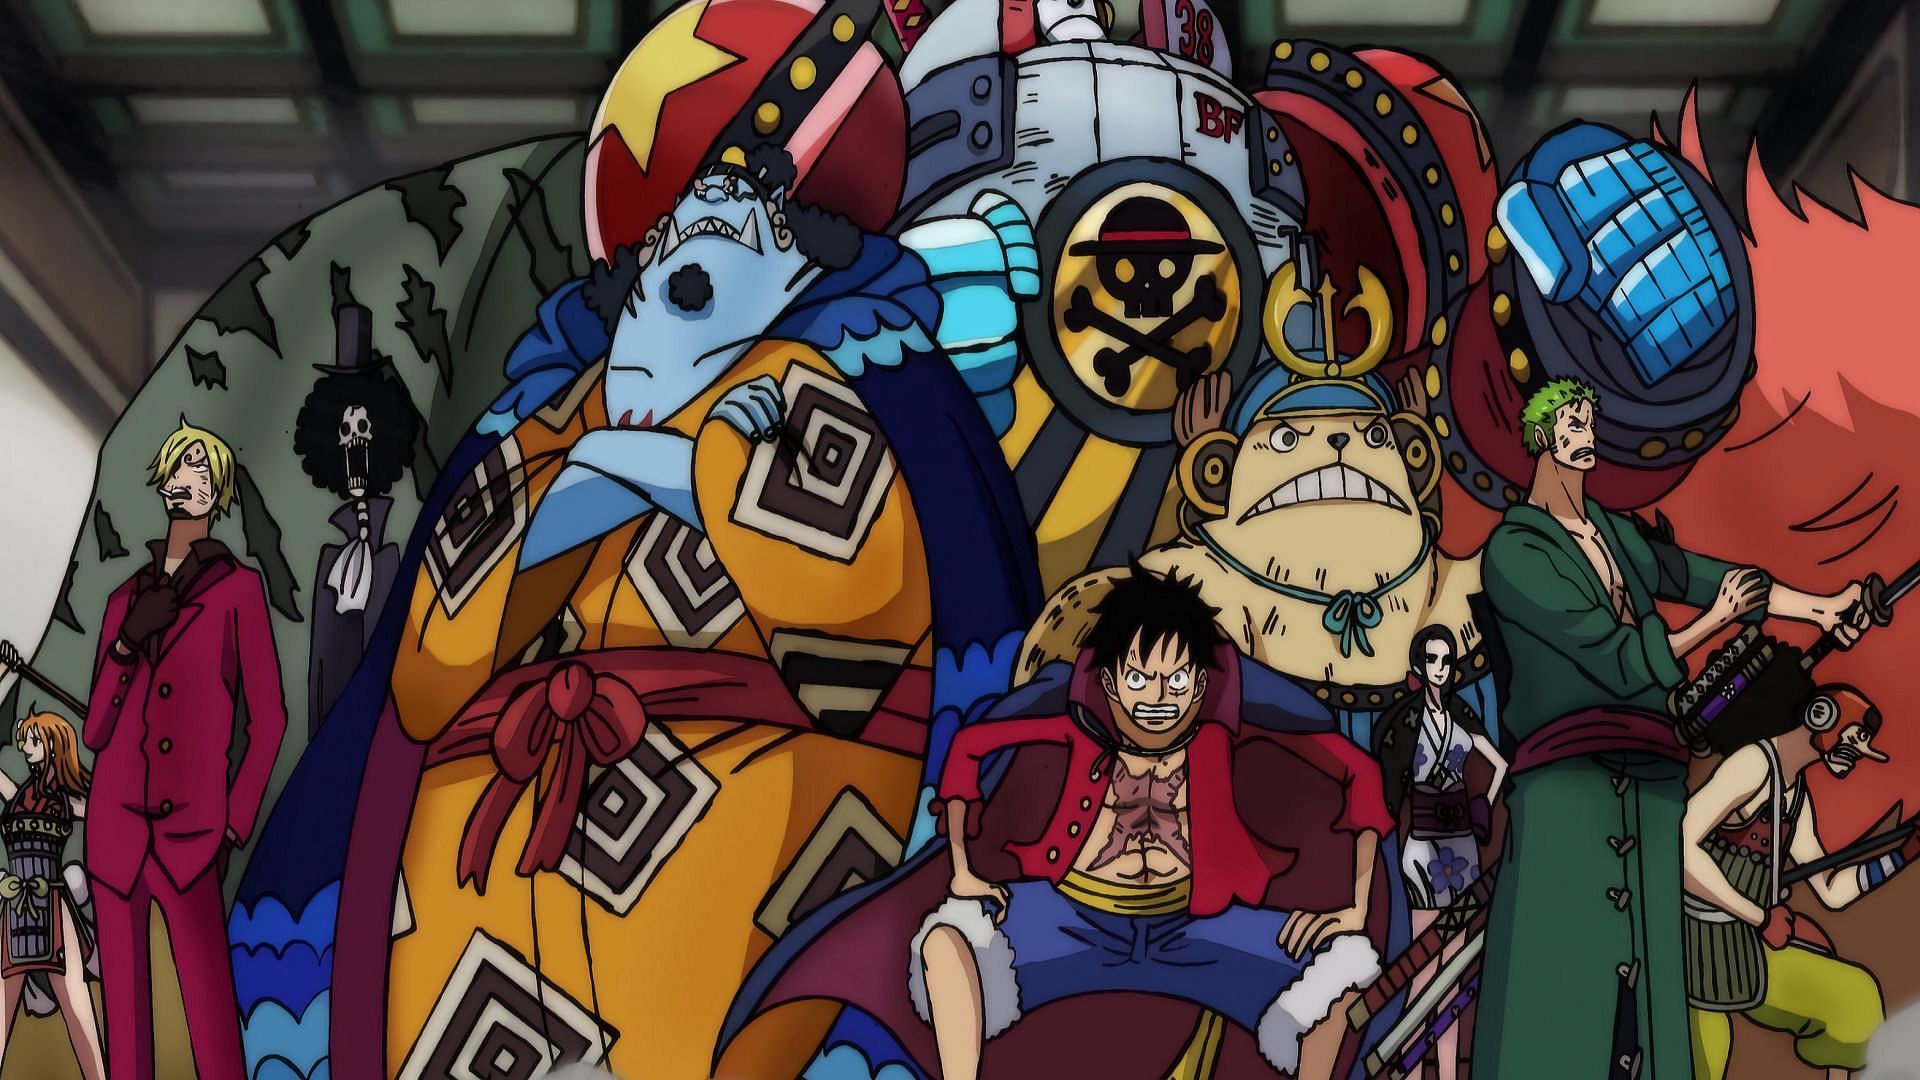 Will any of the One Piece characters in Luffy's group of allies